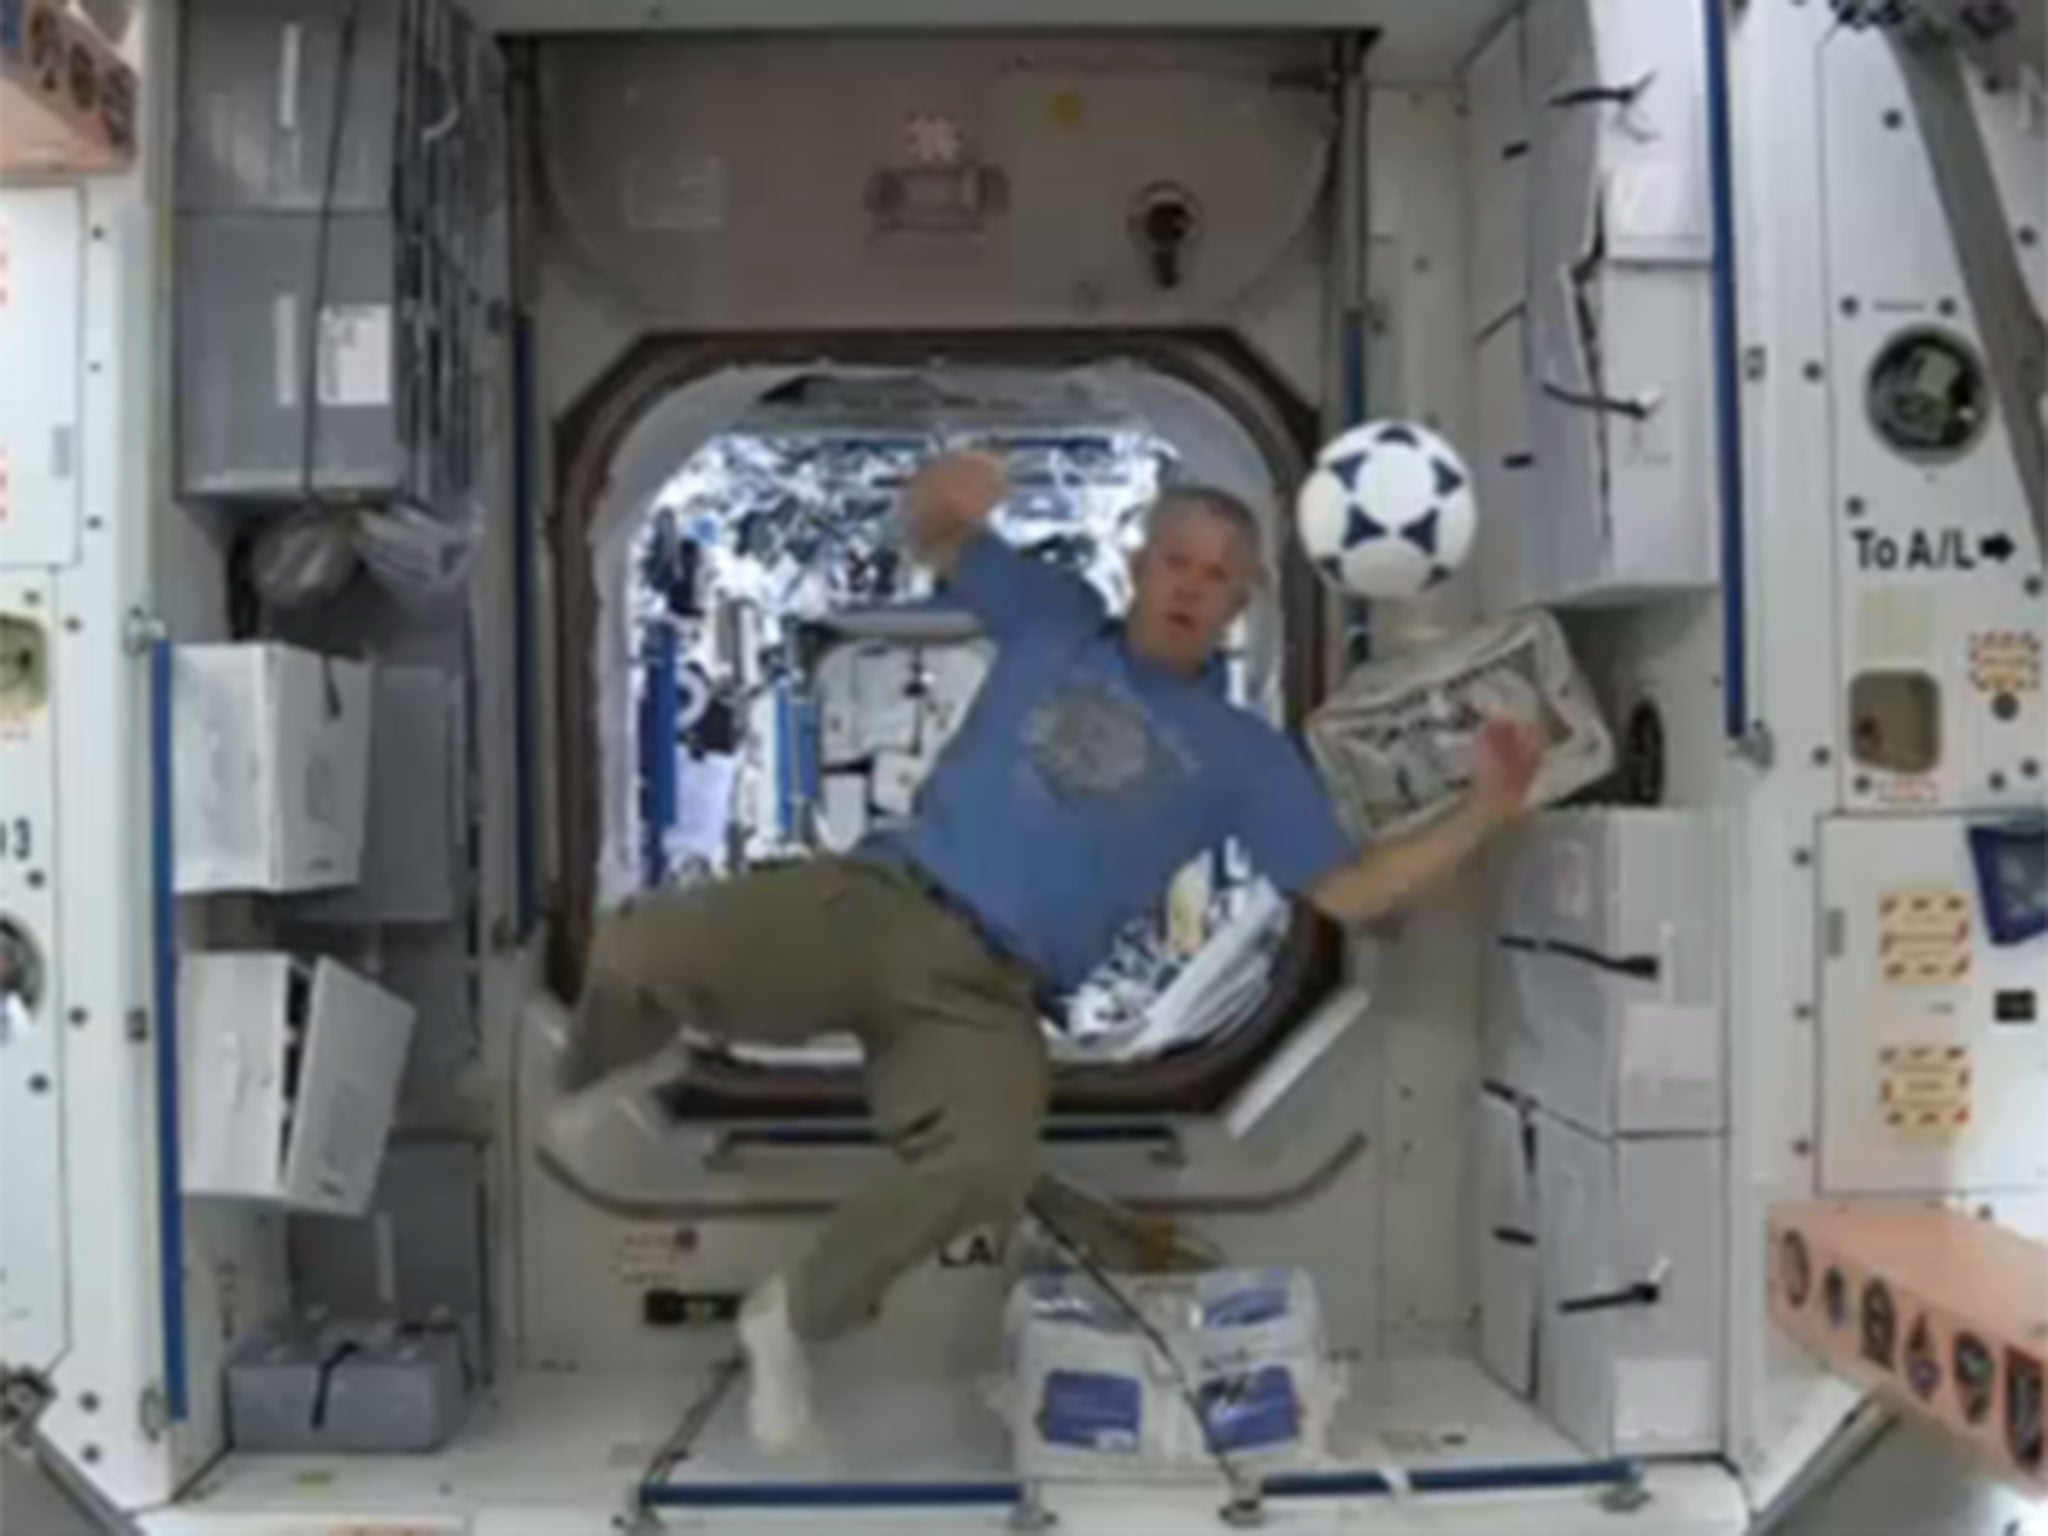 Astronauts in the International Space Station released a video showing off their football skills in zero gravity, as they wished all the teams in the World Cup good luck.